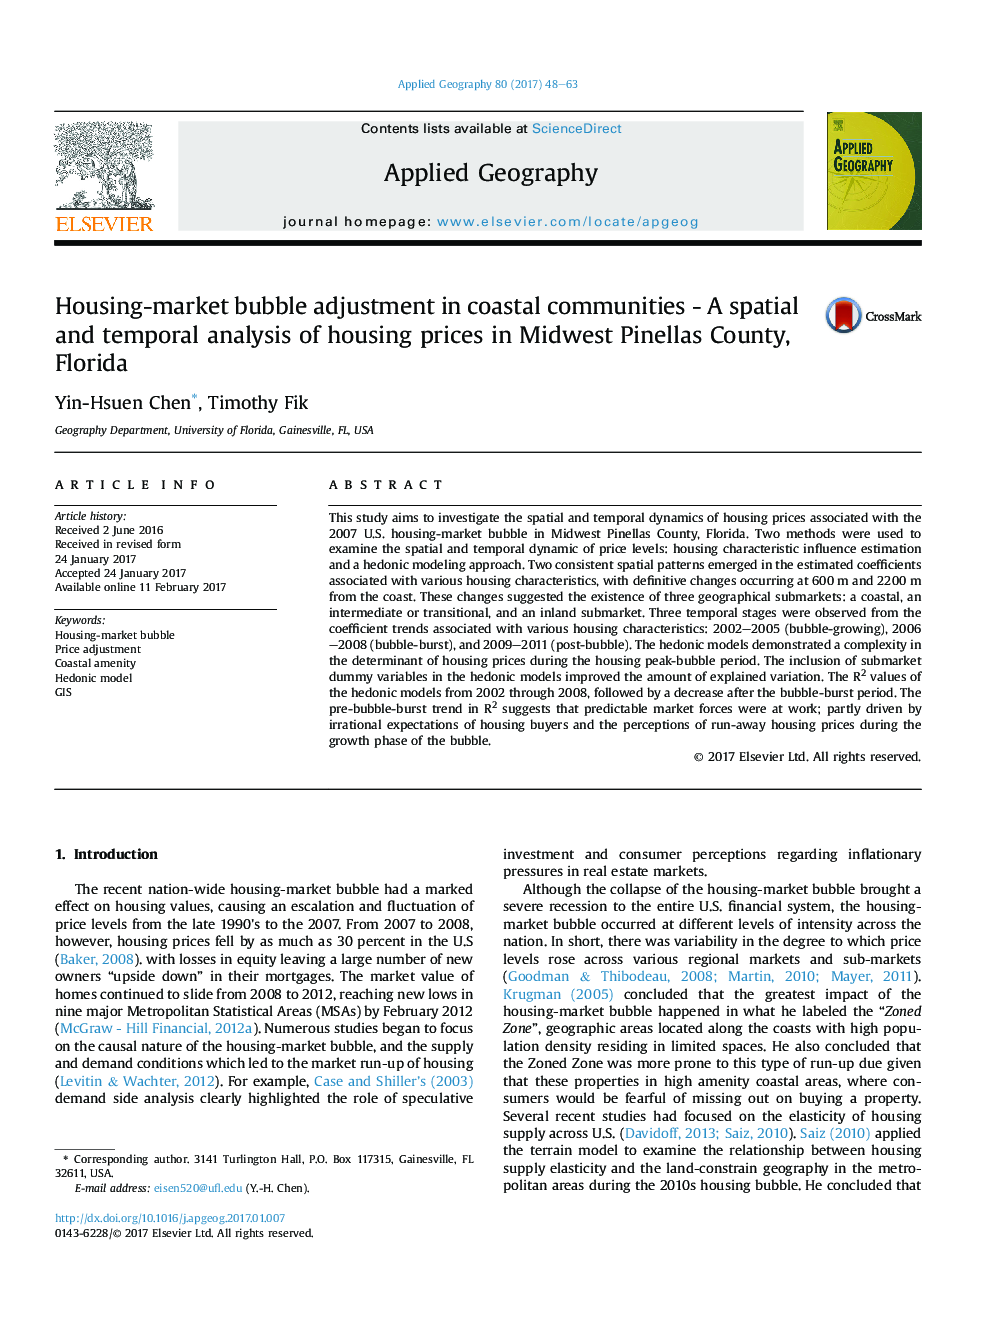 Housing-market bubble adjustment in coastal communities - A spatial and temporal analysis of housing prices in Midwest Pinellas County, Florida